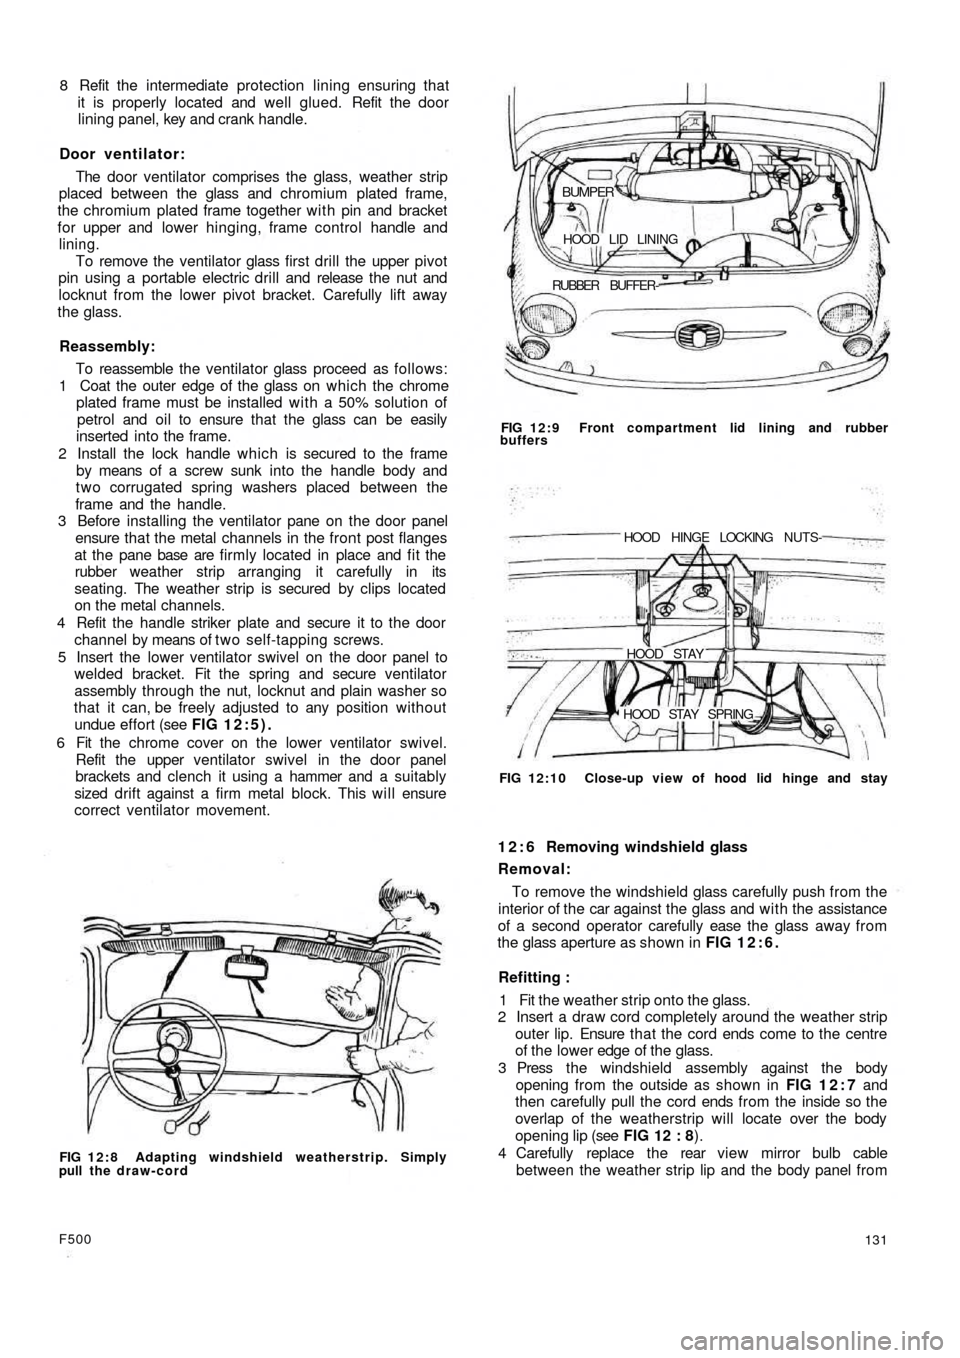 FIAT 500 1964 1.G Workshop Manual 8 Refit the intermediate protection lining ensuring that
it is properly located and well glued. Refit the door
lining panel, key and crank handle.
Door ventilator:
The door ventilator comprises the gl